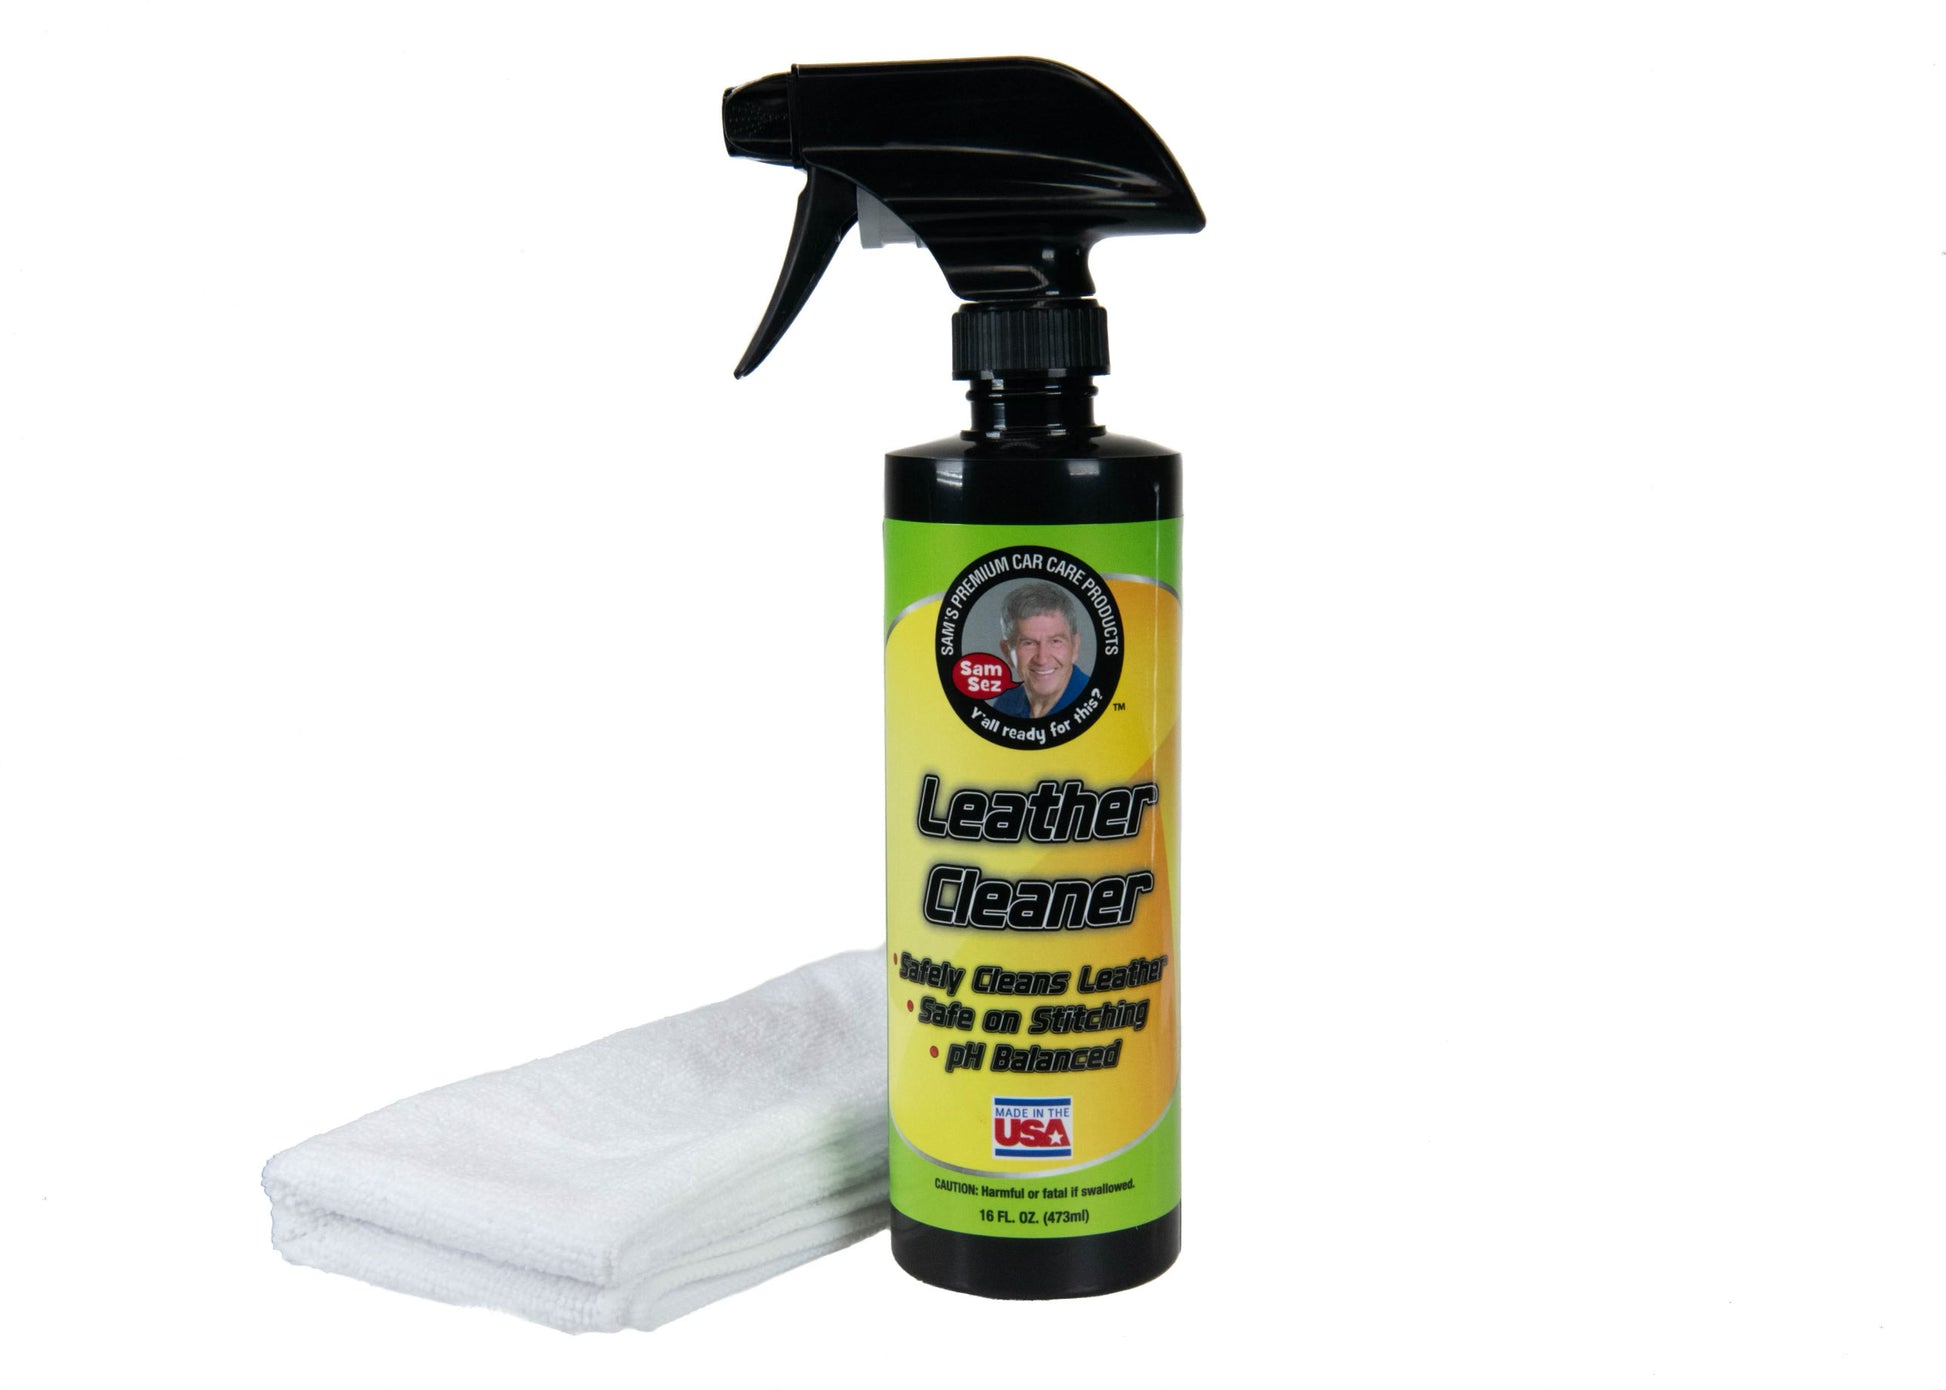 Pro Leather Cleaning Kit